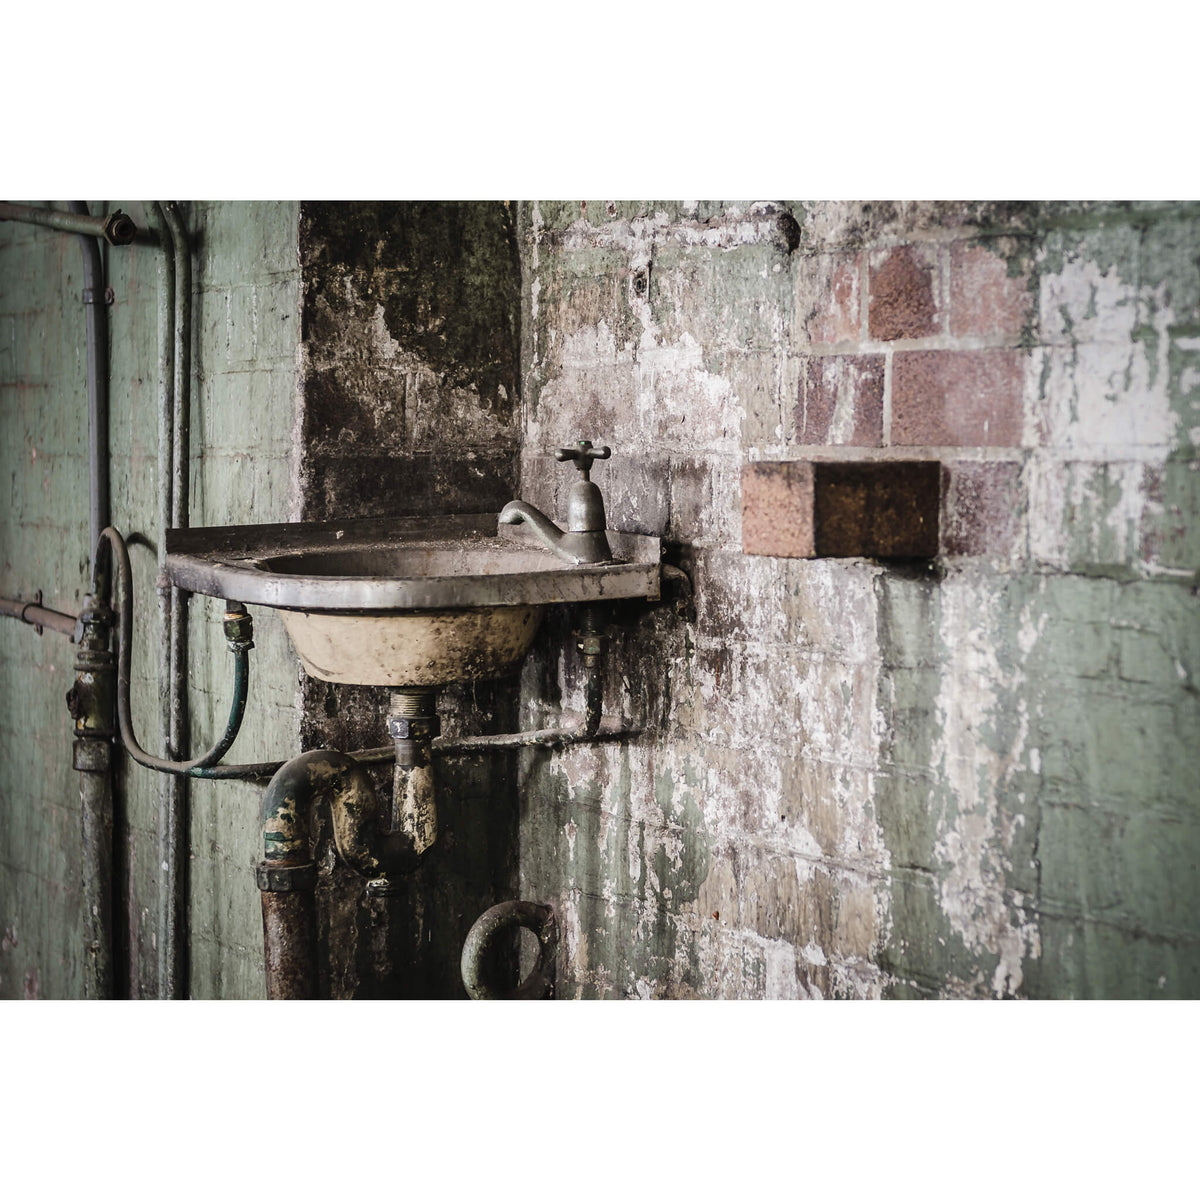 Hand Basin | West Ryde Pumping Station Fine Art Print - Lost Collective Shop